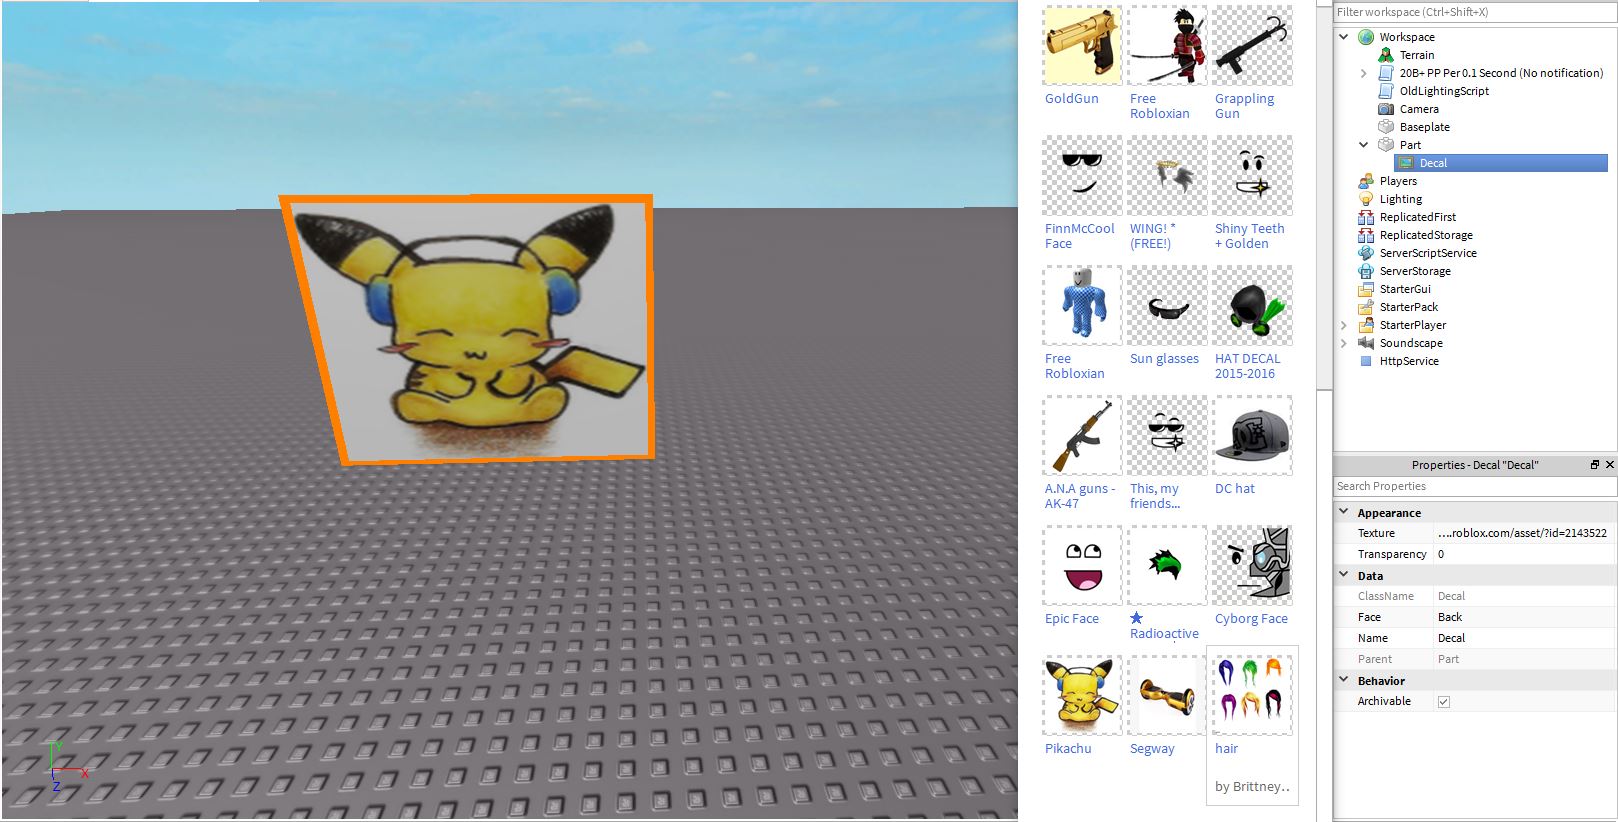 Decal Roblox Wiki Fandom - how to make a decal in roblox